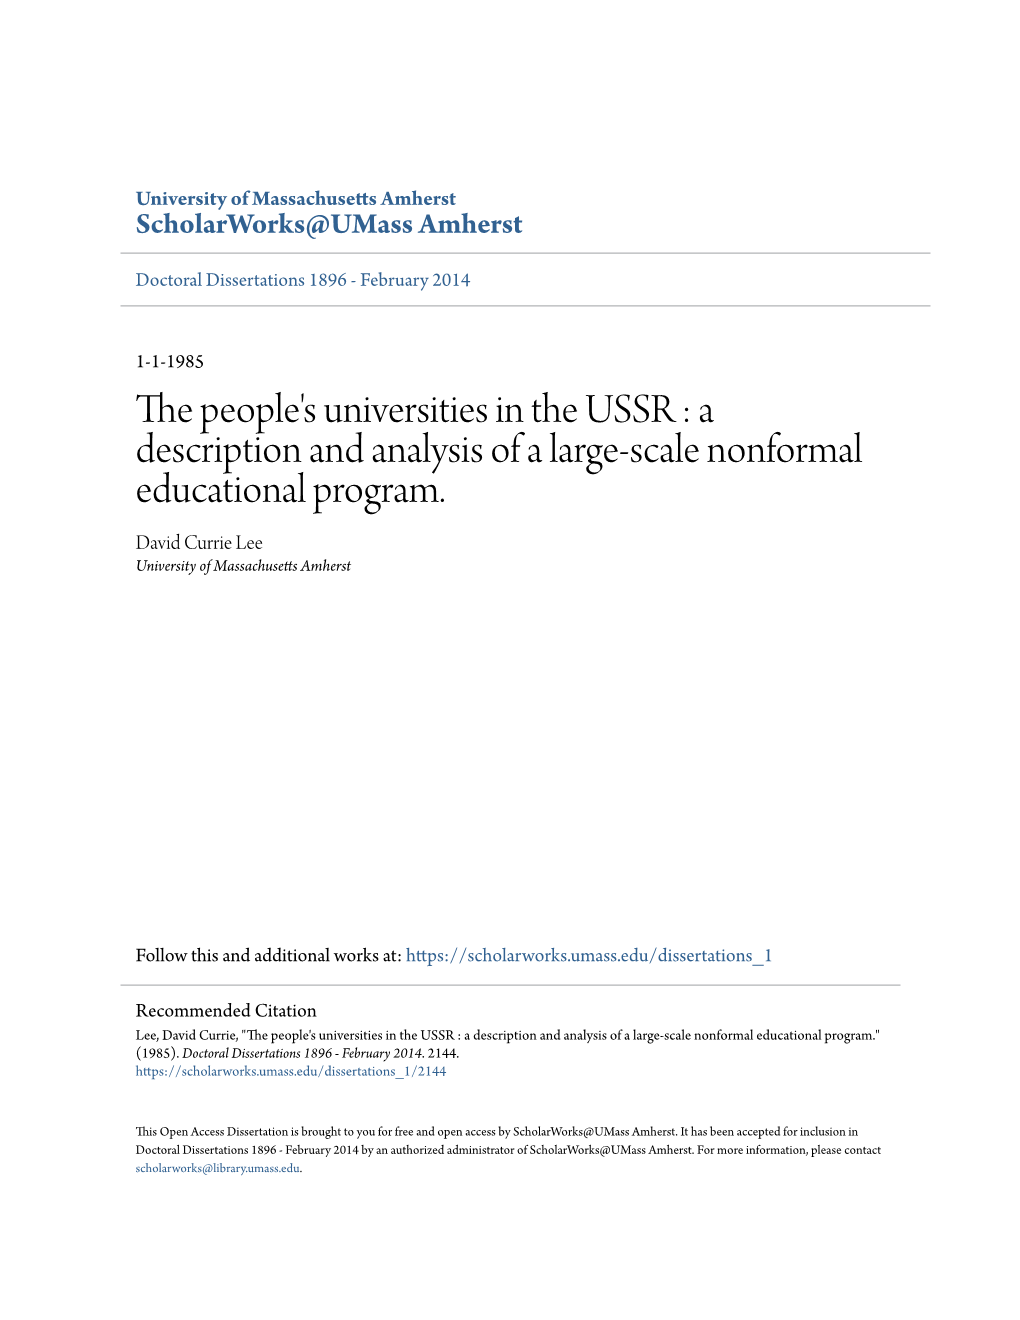 The People's Universities in the USSR : a Description and Analysis of a Large-Scale Nonformal Educational Program